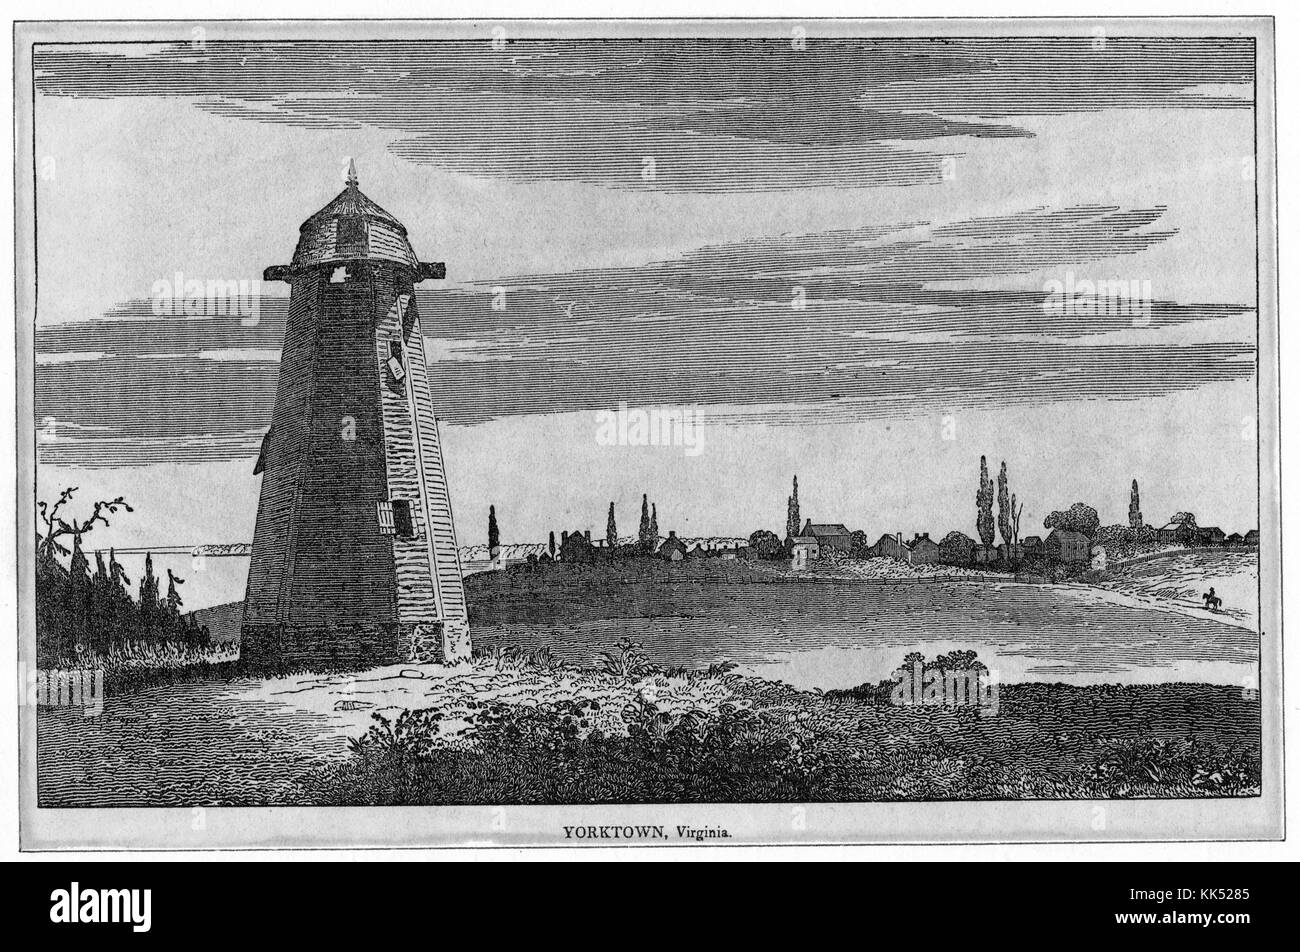 An engraving from a landscape painting of Yorktown, a lighthouse is seen in the foreground of the image while the town itself can be seen in the background, the town is most famous for the Siege of Yorktown which was a victory for combined Continental and French forces against the British, Virginia, 1800. From the New York Public Library. Stock Photo